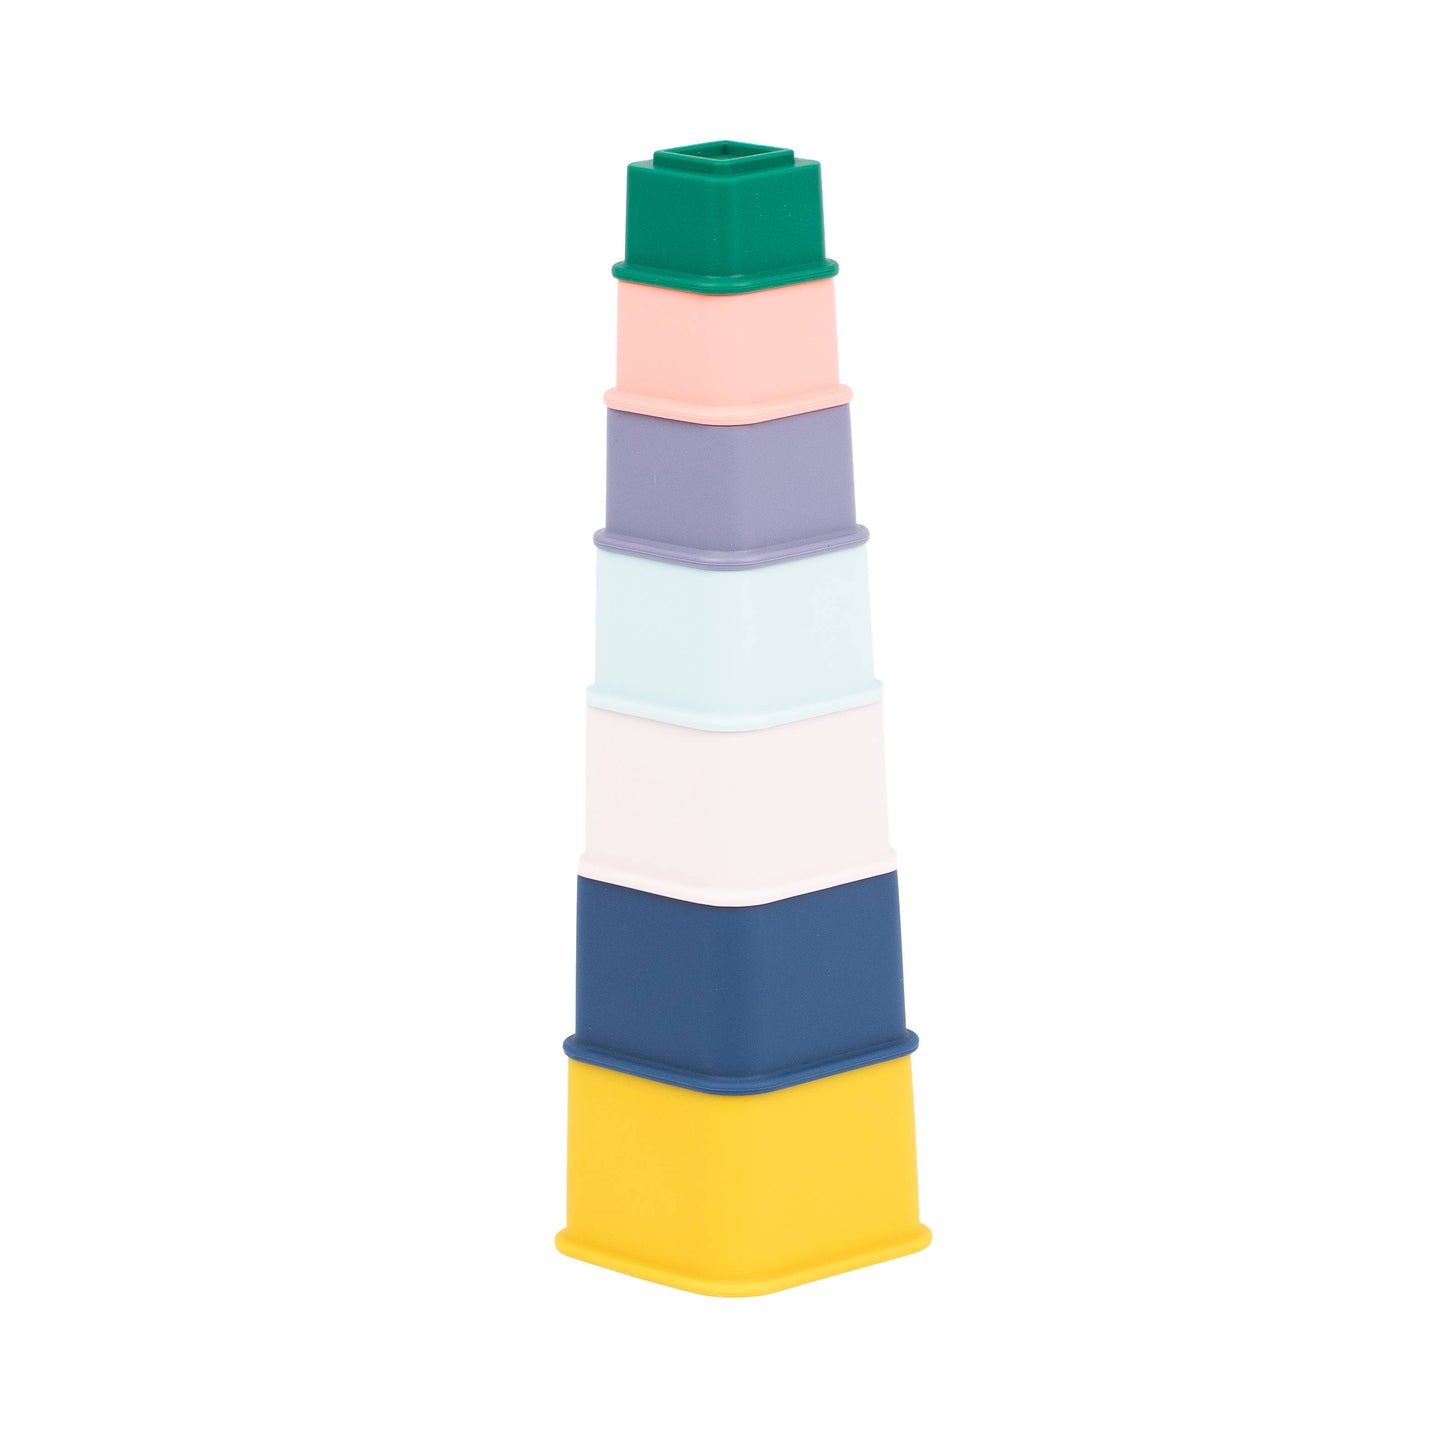 Bella Tunno - Modern Brights Happy Stacks - a gift that gives a meal  Bella Tunno   -better made easy-eco-friendly-sustainable-gifting